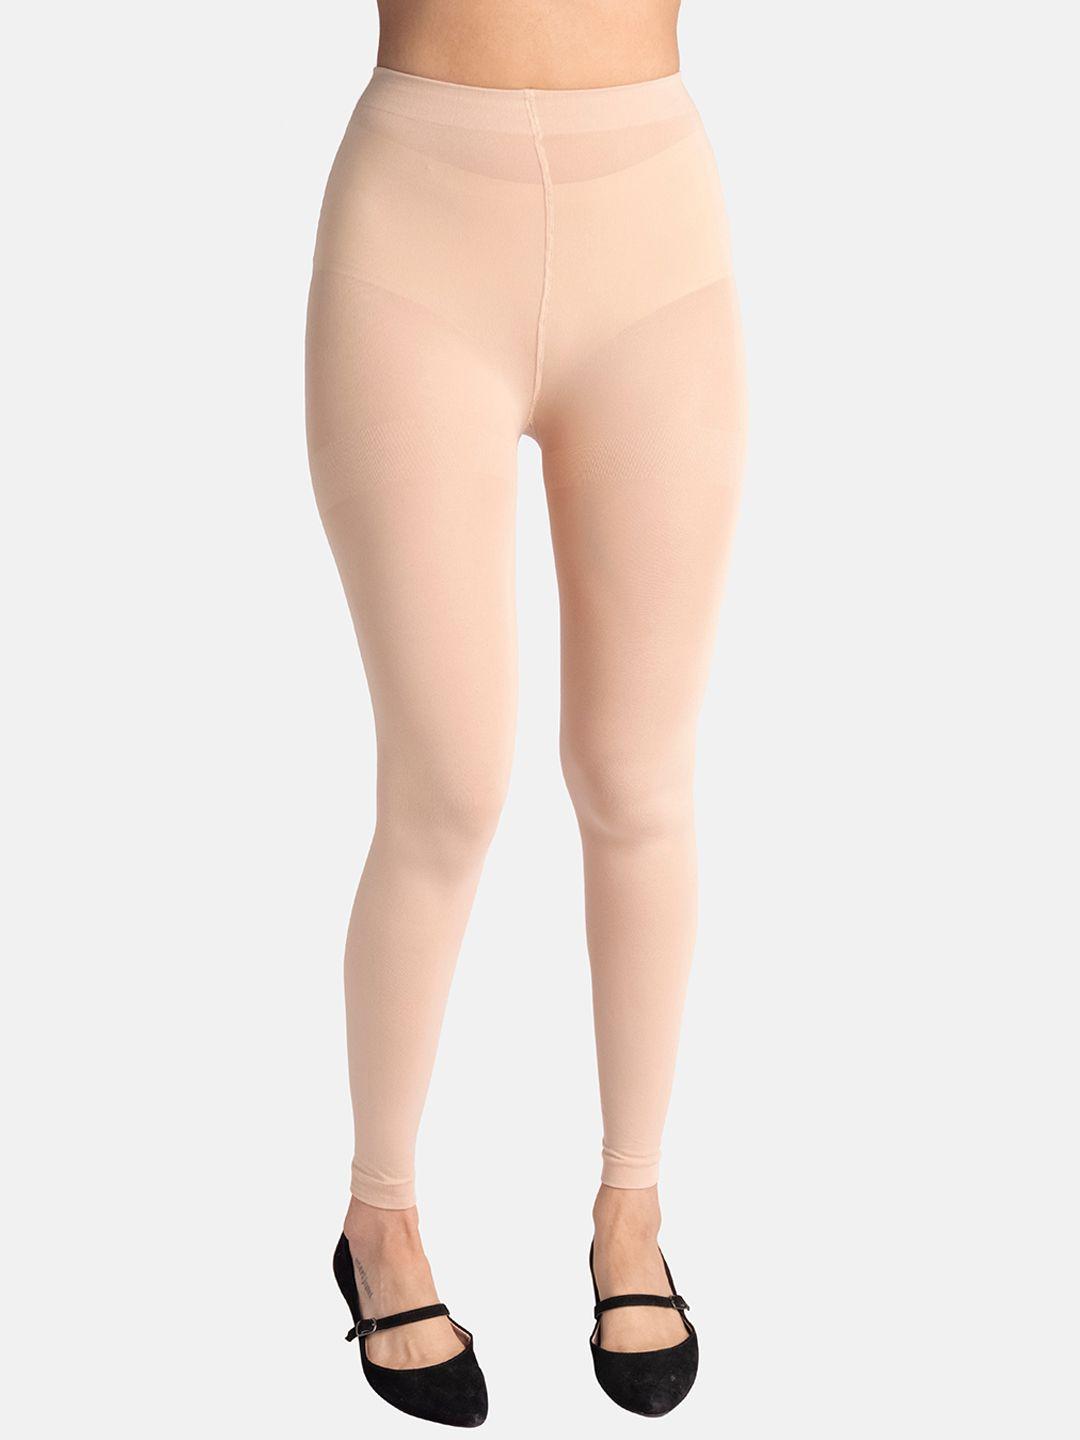 theater women beige high-rise radiant sand sheer tights